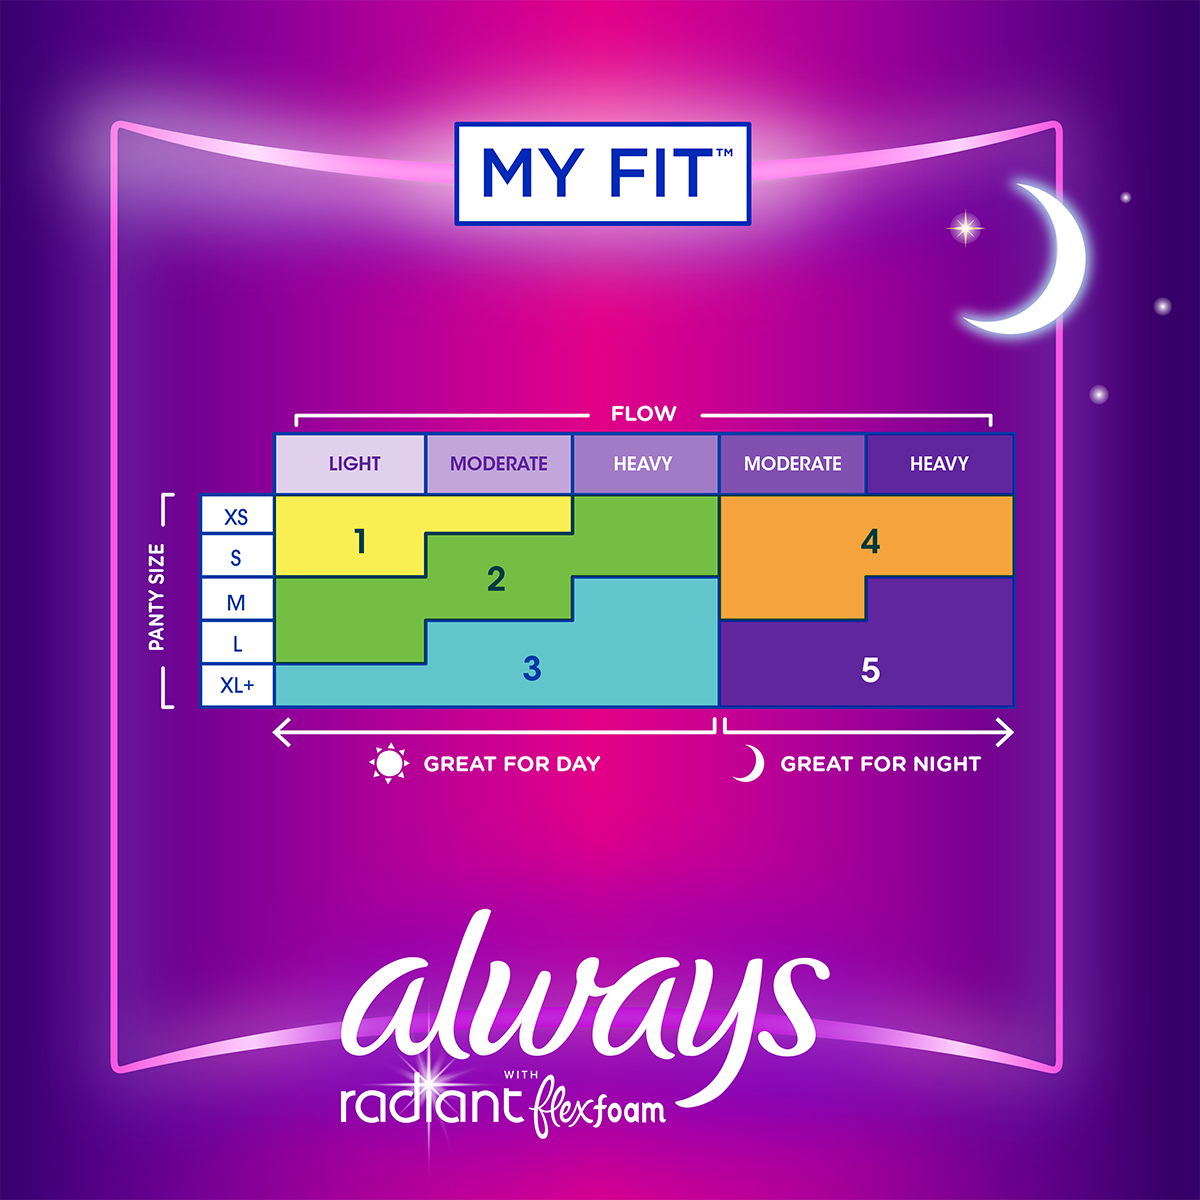 Always Radiant Overnight Feminine Pads for Women, Size 4 for Nighttime,  with Wings, Scented, 10CT 